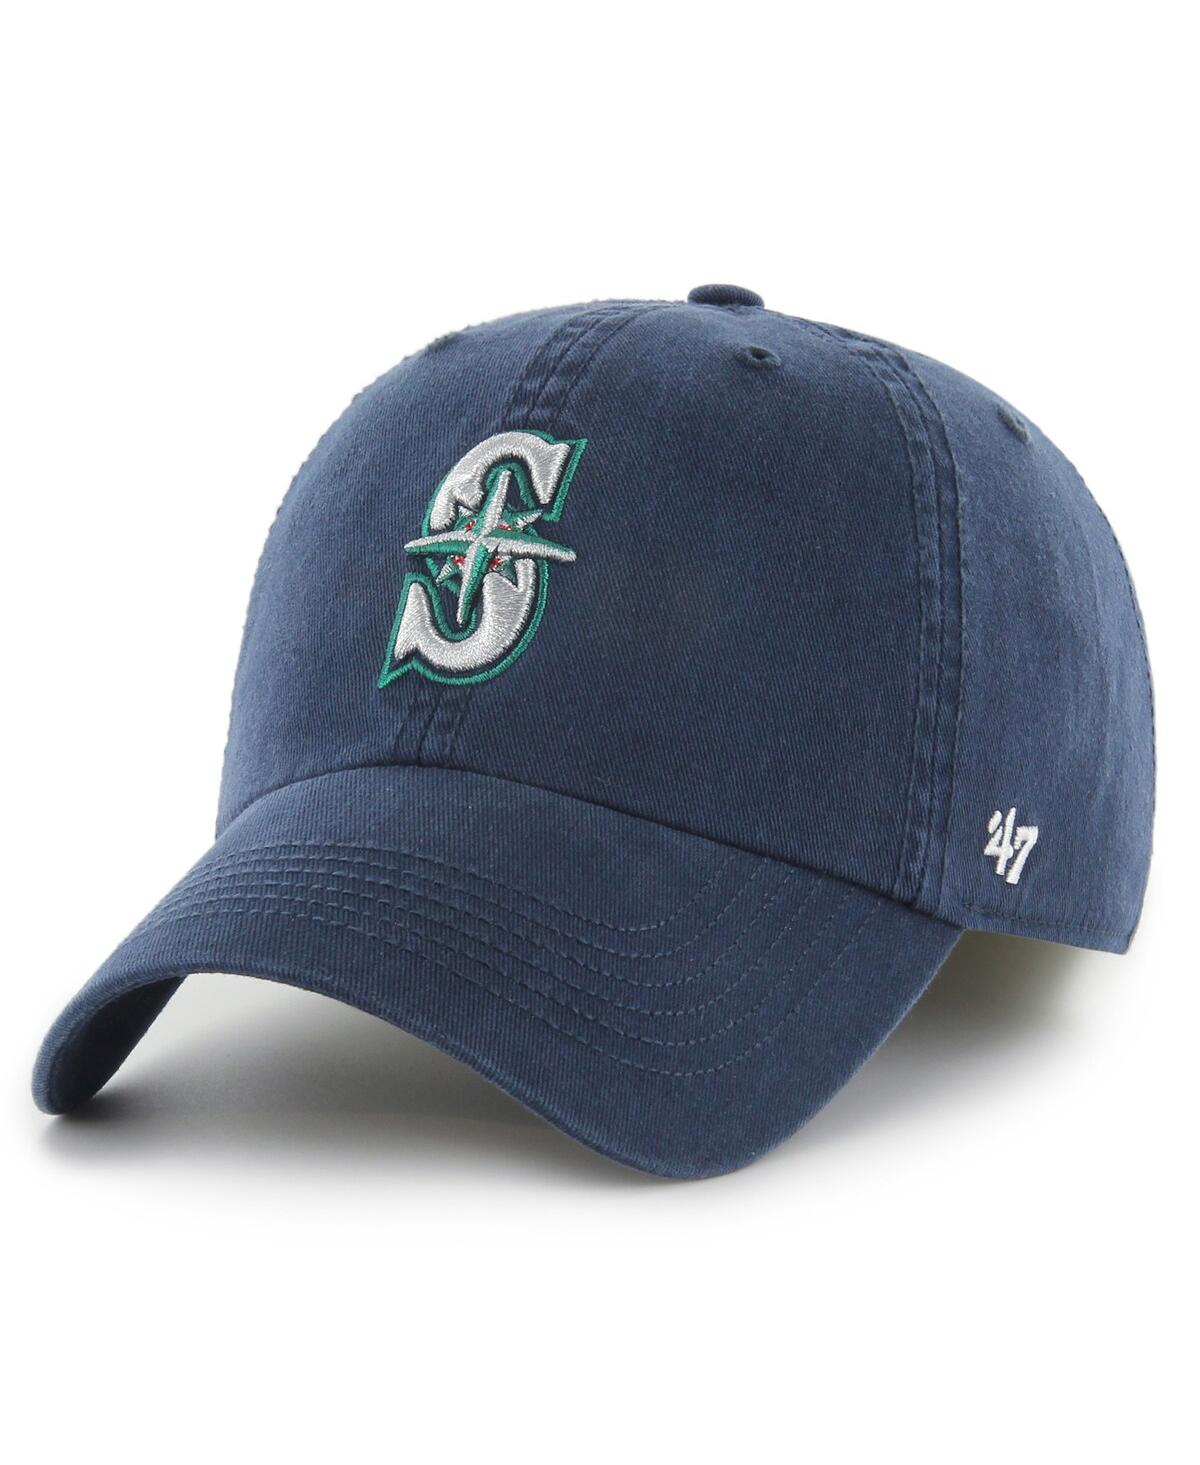 47 BRAND MEN'S '47 BRAND NAVY SEATTLE MARINERS FRANCHISE LOGO FITTED HAT